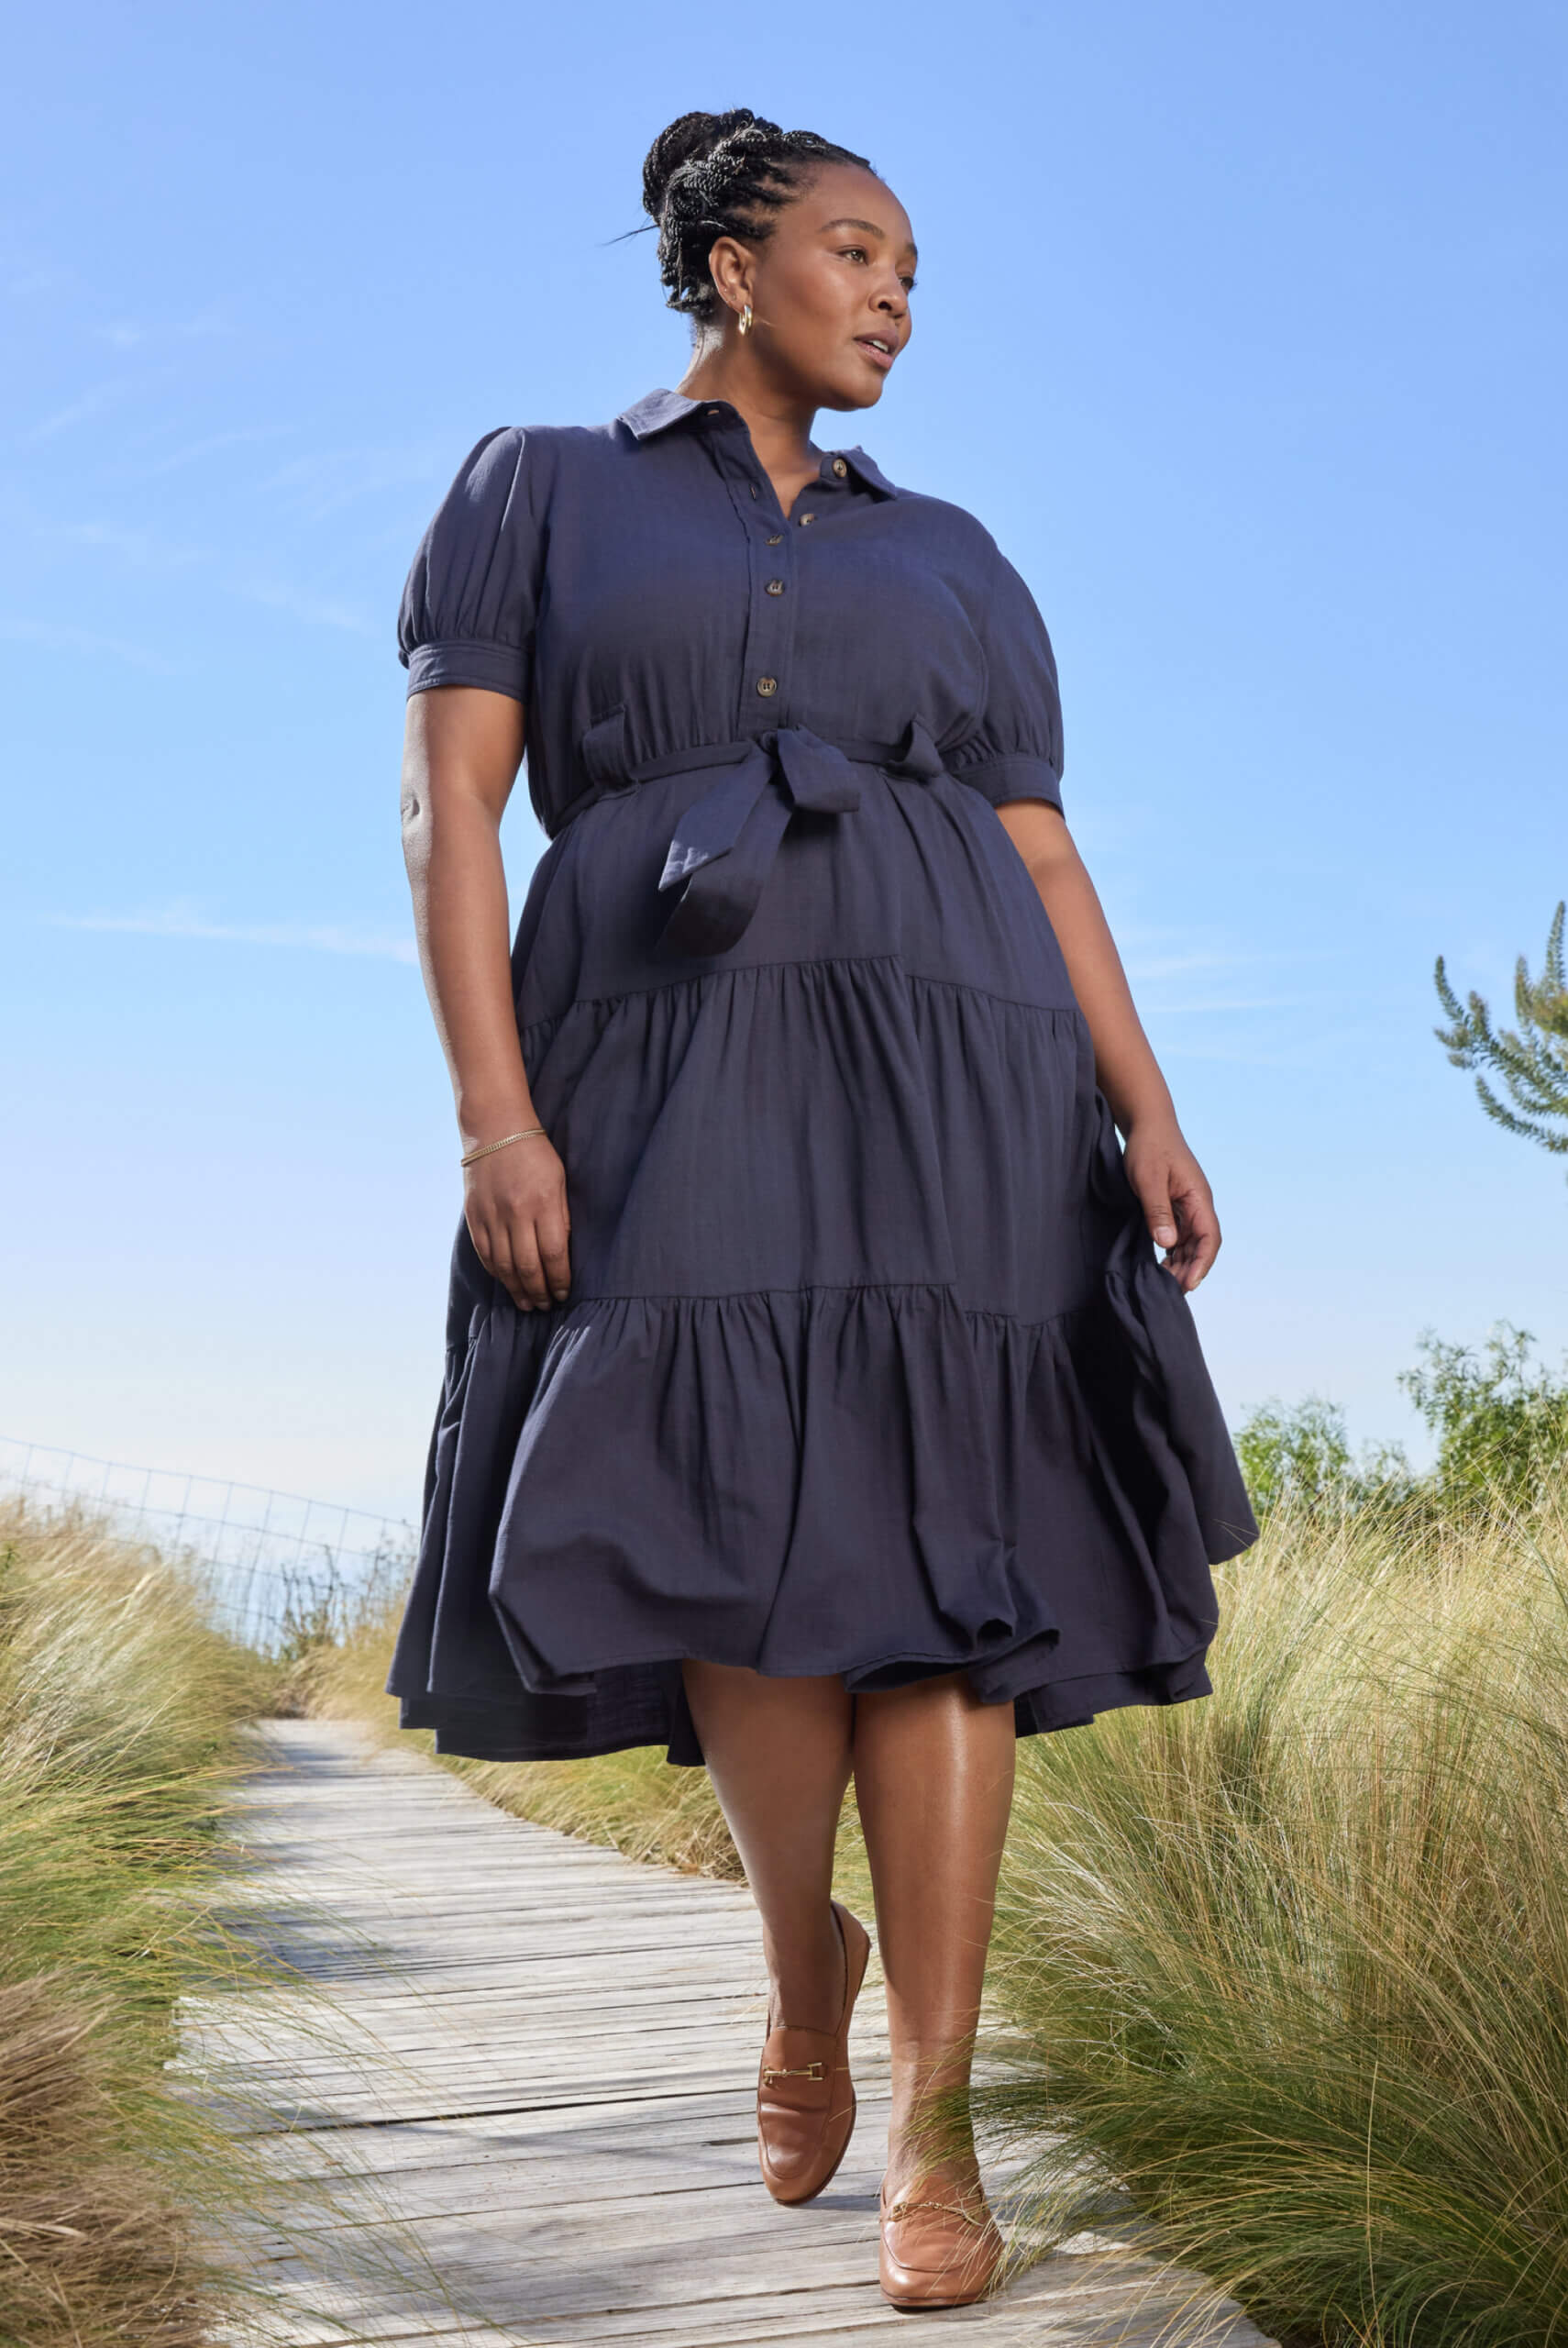  A woman in a short-sleeved, dusky blue tiered shirtdress.